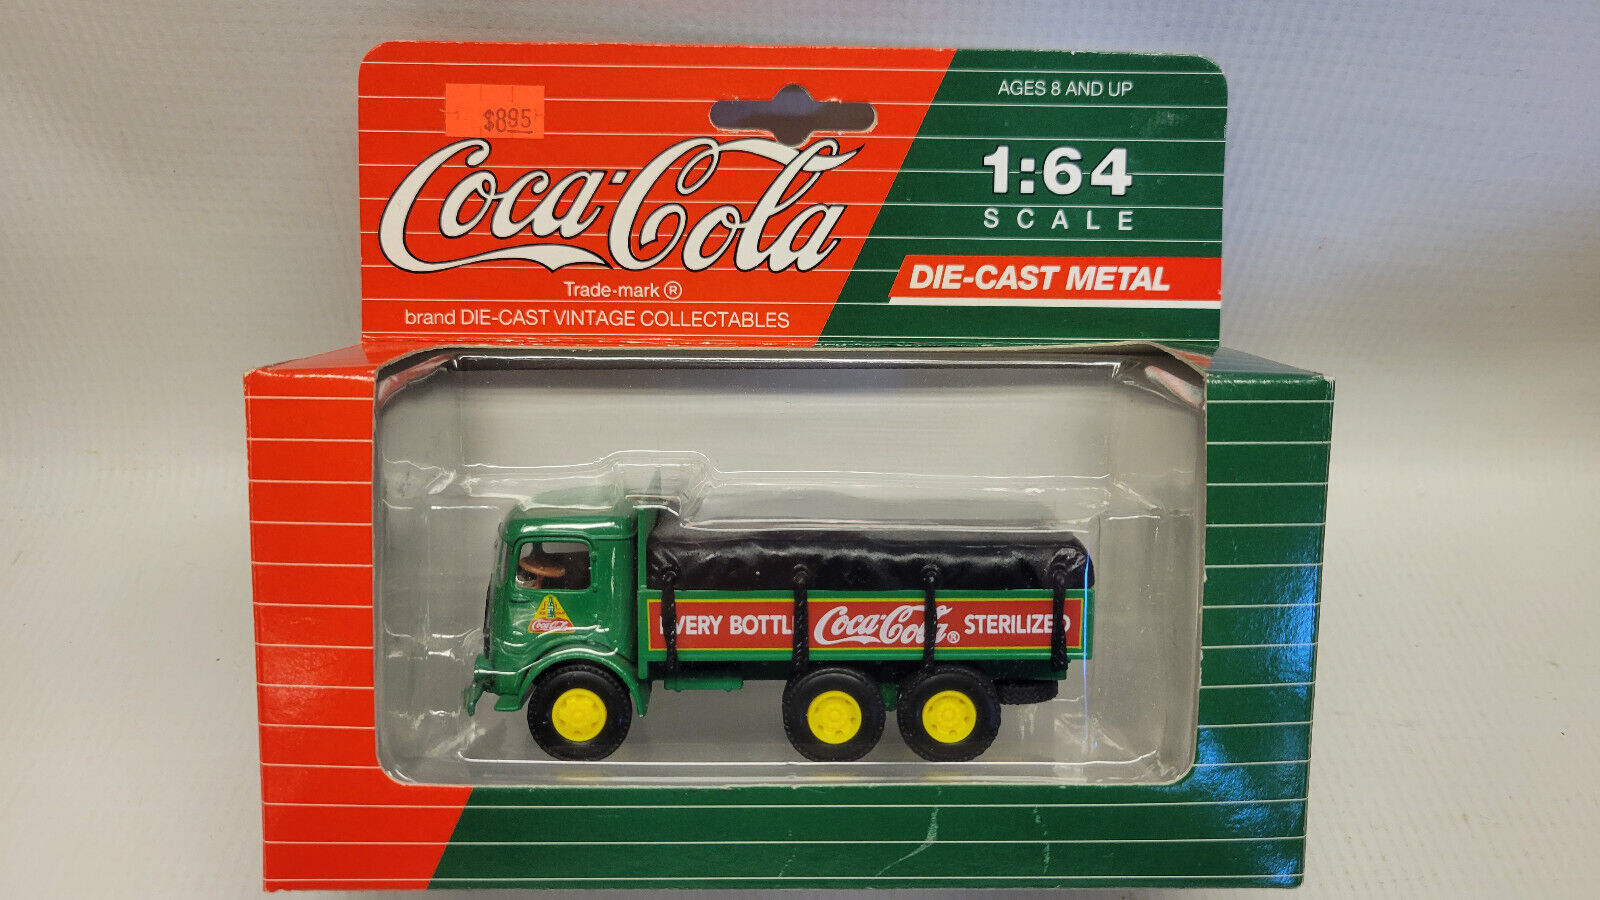 Vintage Coca-Cola Toy Trucks by Hartoy - 1:64 DieCast New in Box - your choice